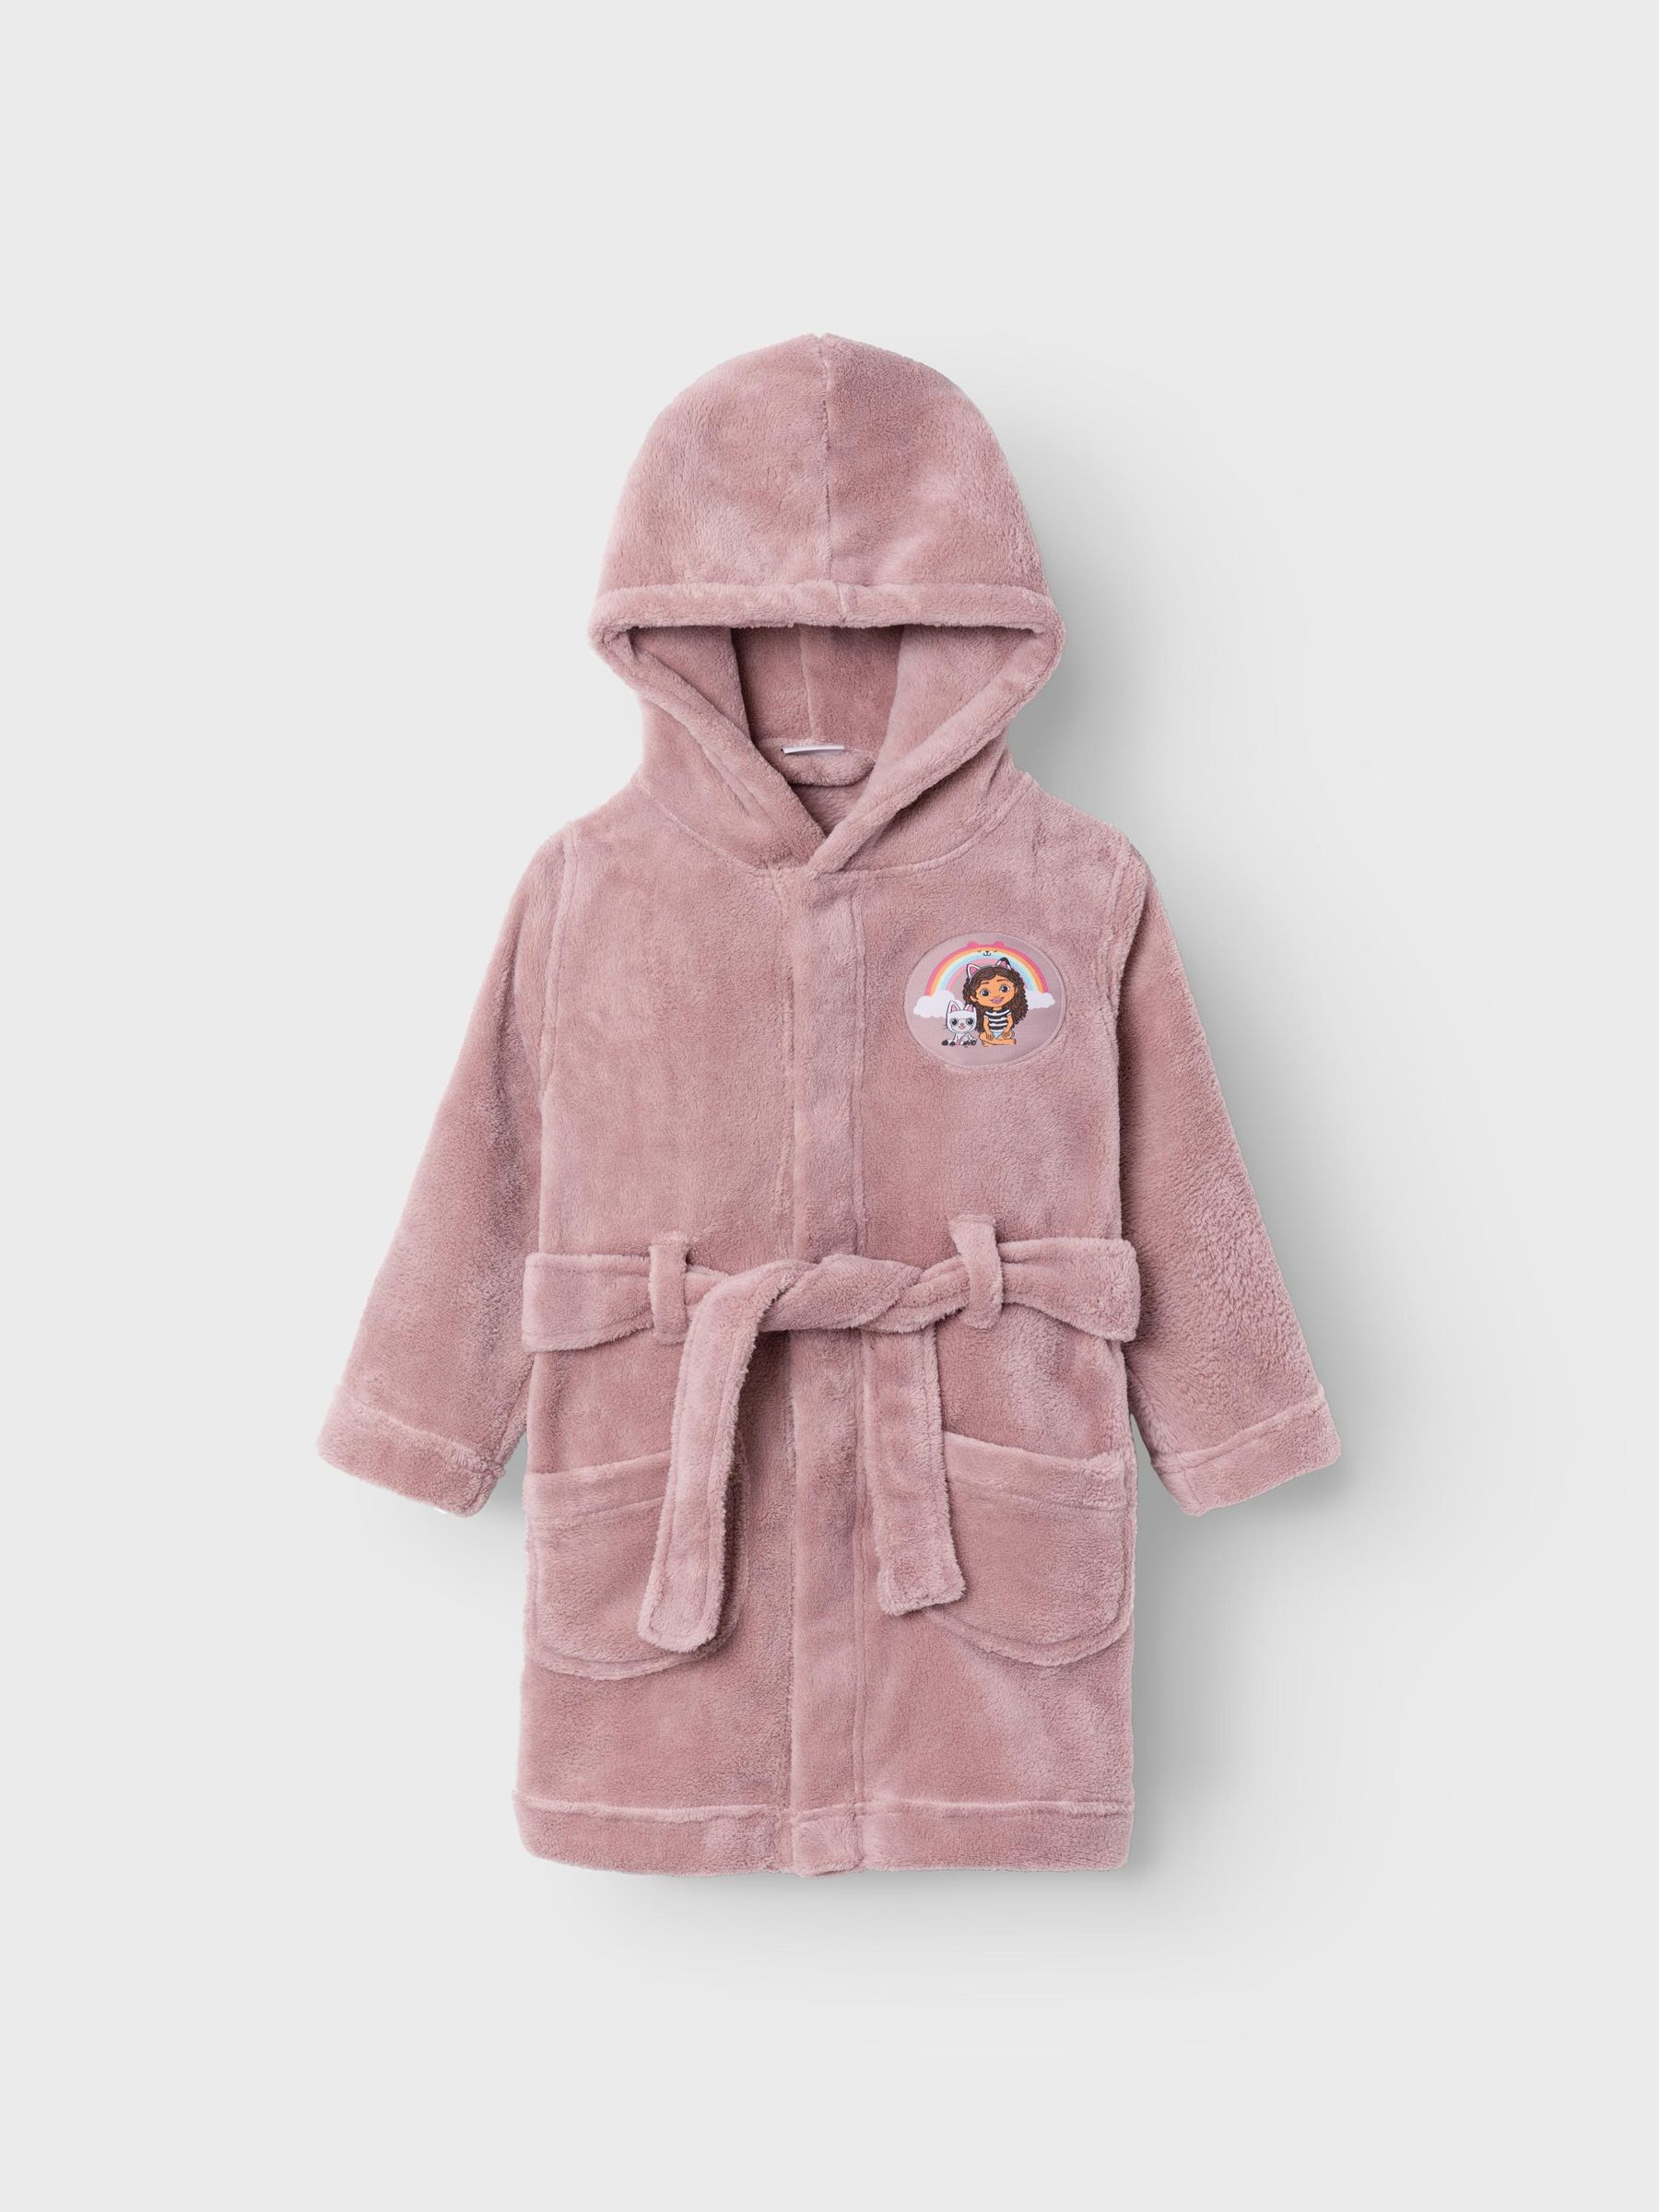 Personalised Fairy Princess Fleece Dressing Gown | My 1st Years